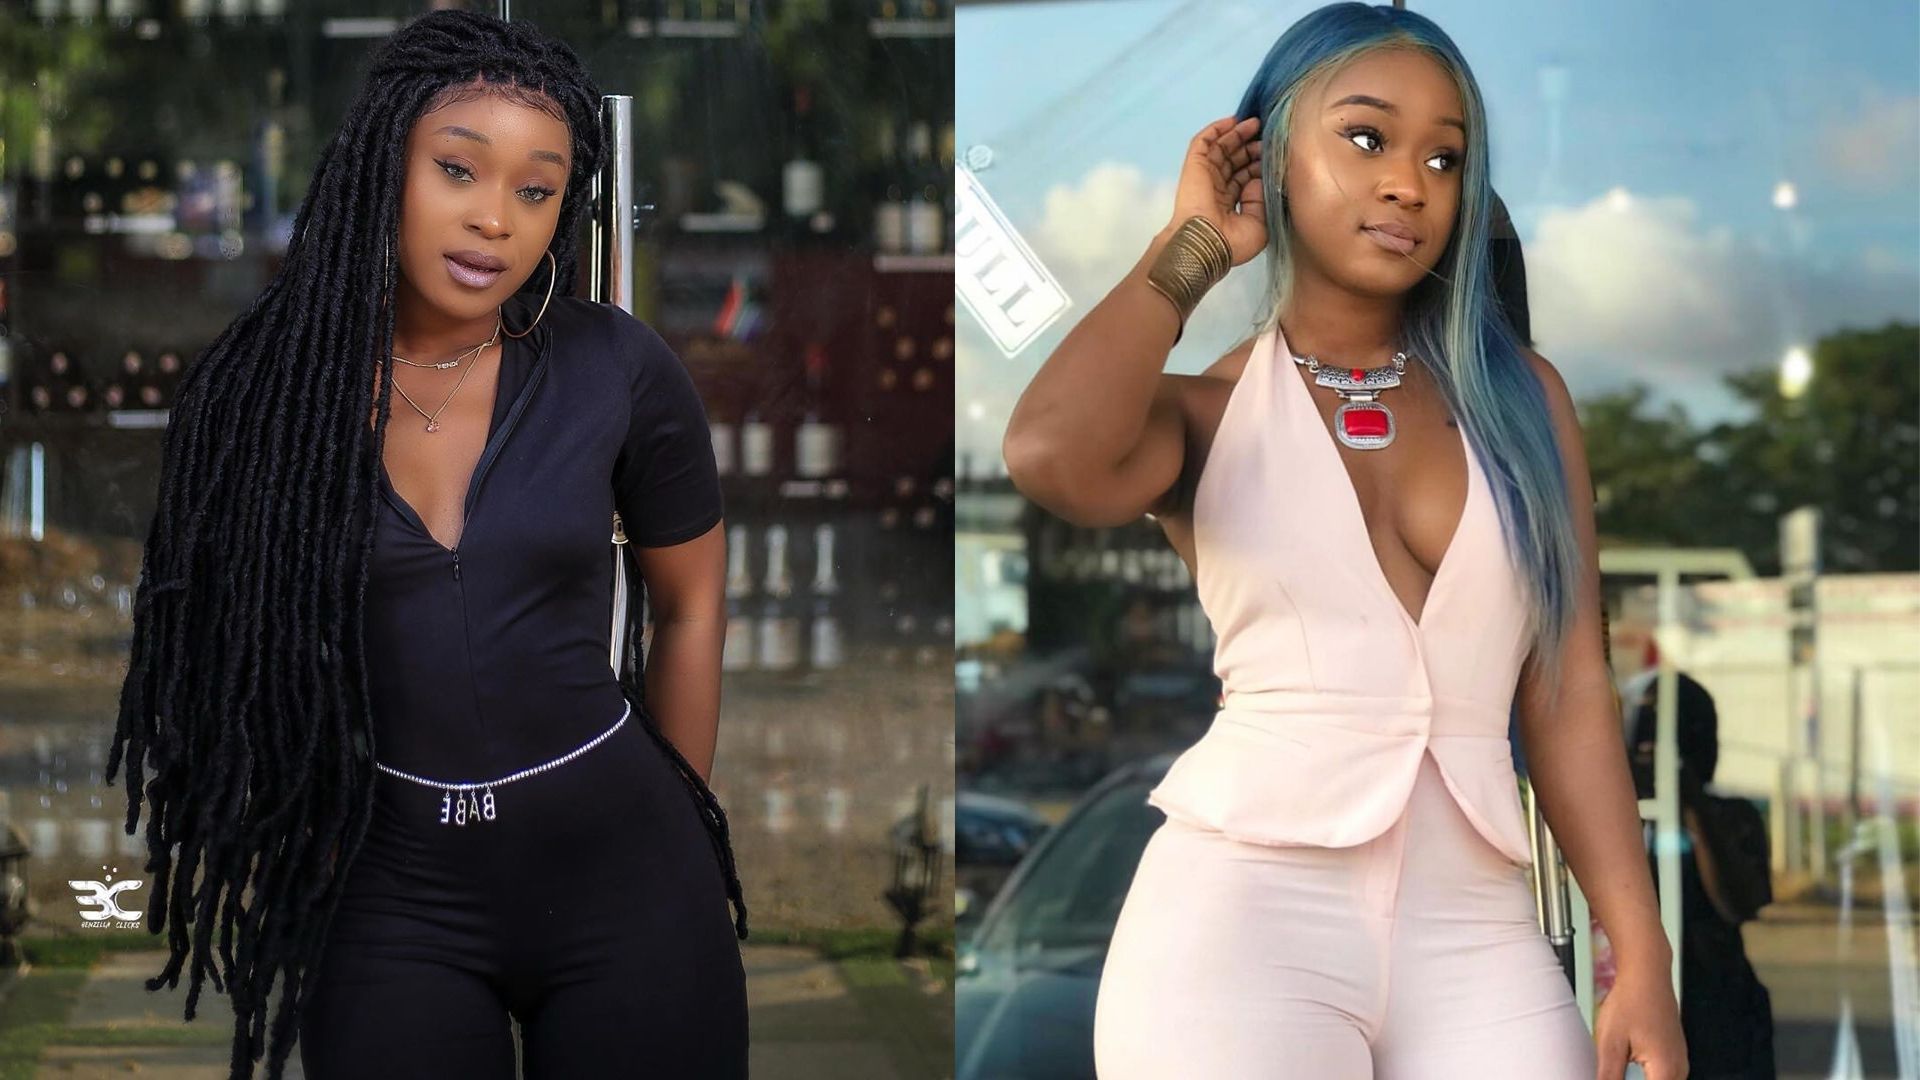 Planned demo by Efia Odo, Influencers other met with varied reactions